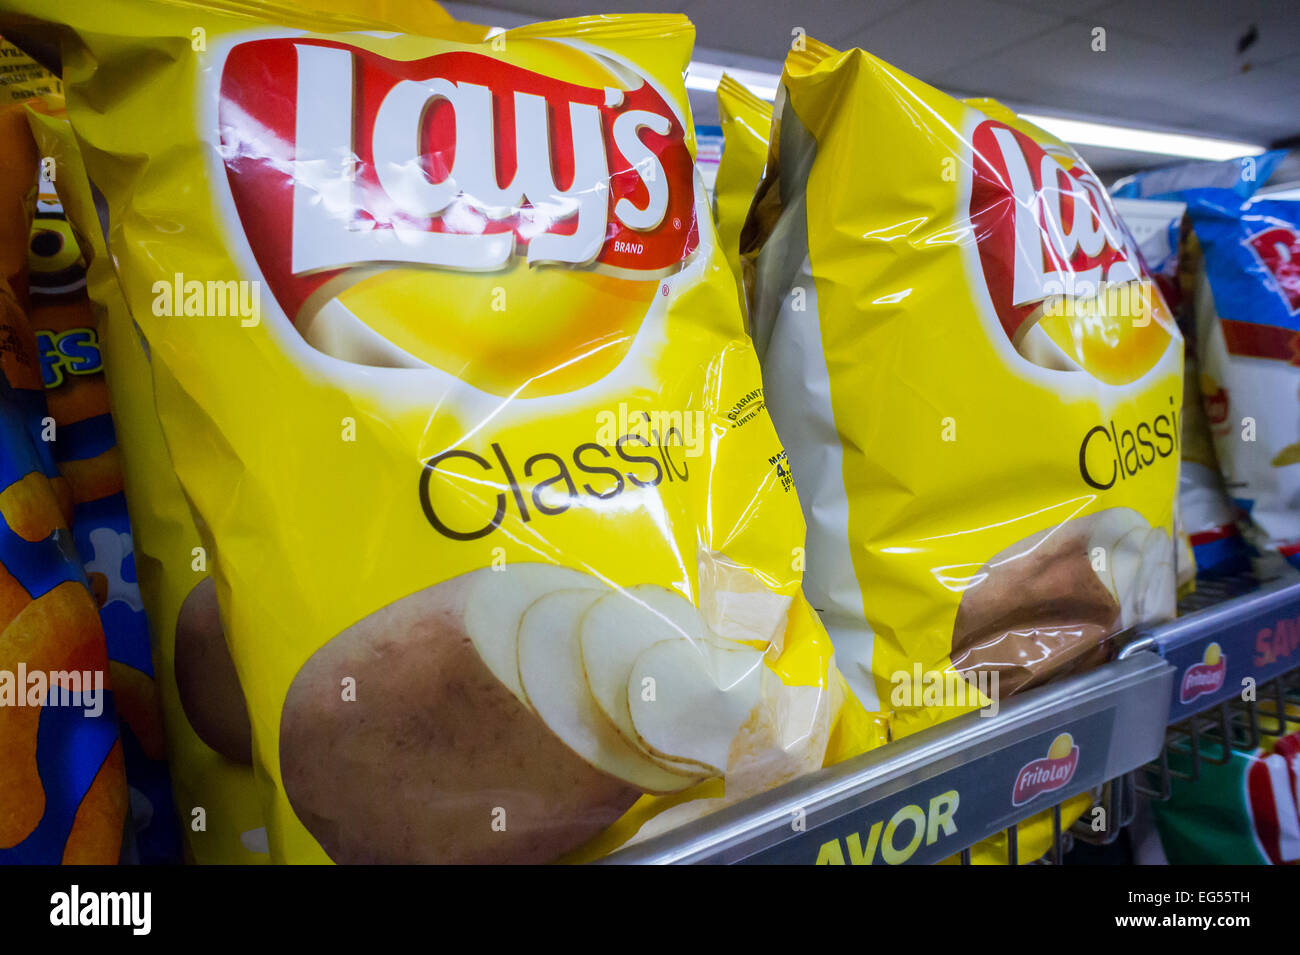 A display of PepsiCo Frito-Lay potato chip snacks in a supermarket in New York on Thursday, February 12, 2015. (© Richard B. Levine) Stock Photo